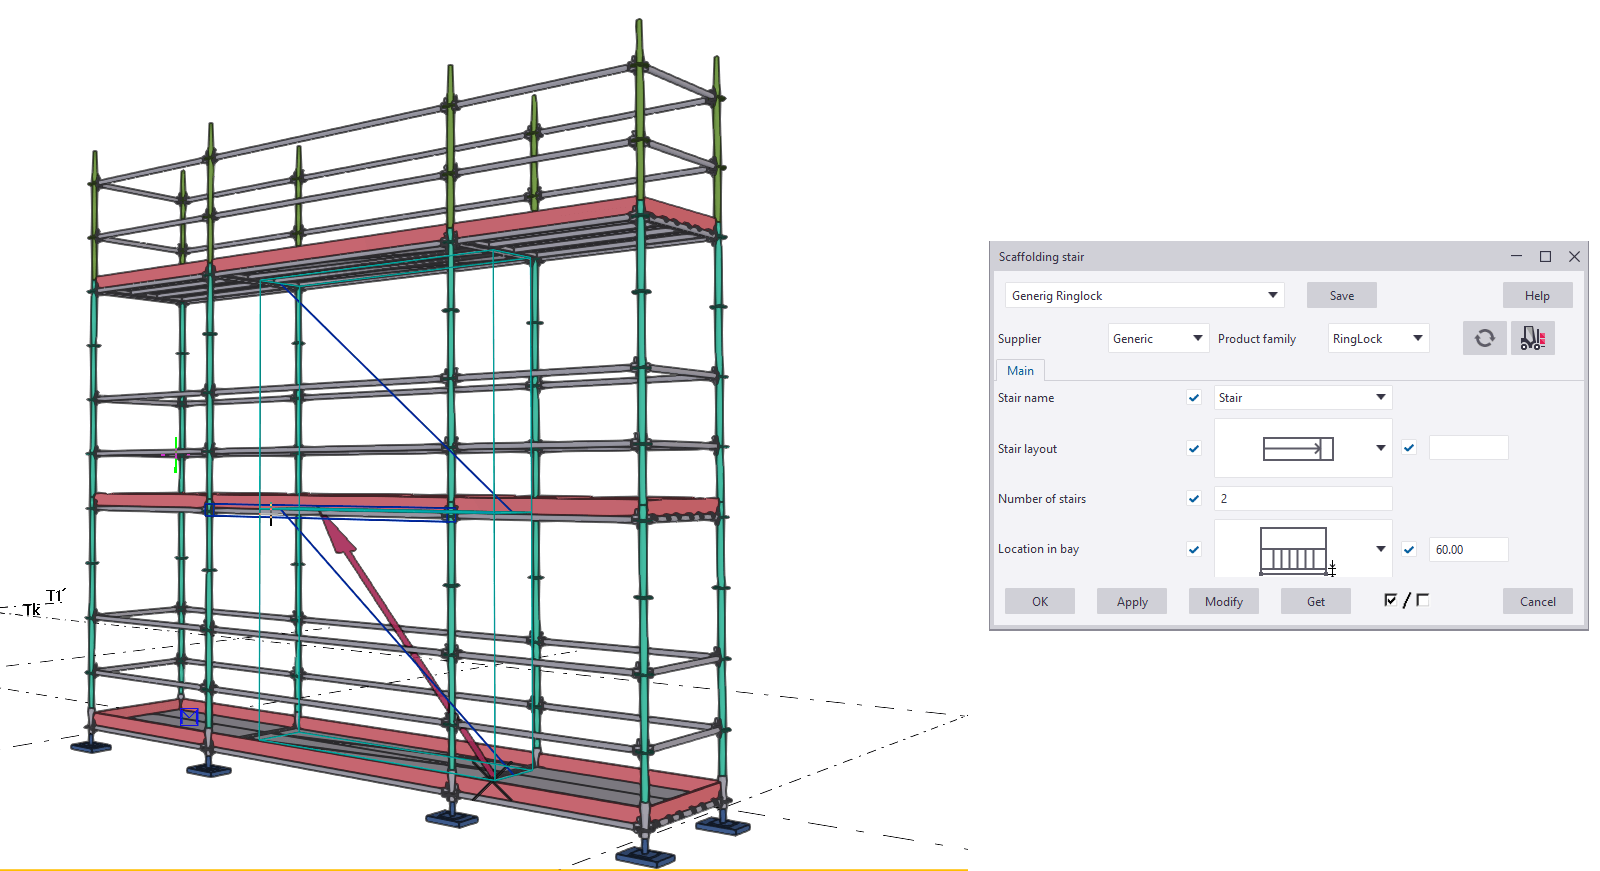 New Scaffolding tool (extension) offers brand new functionality to Tekla Structures 2021